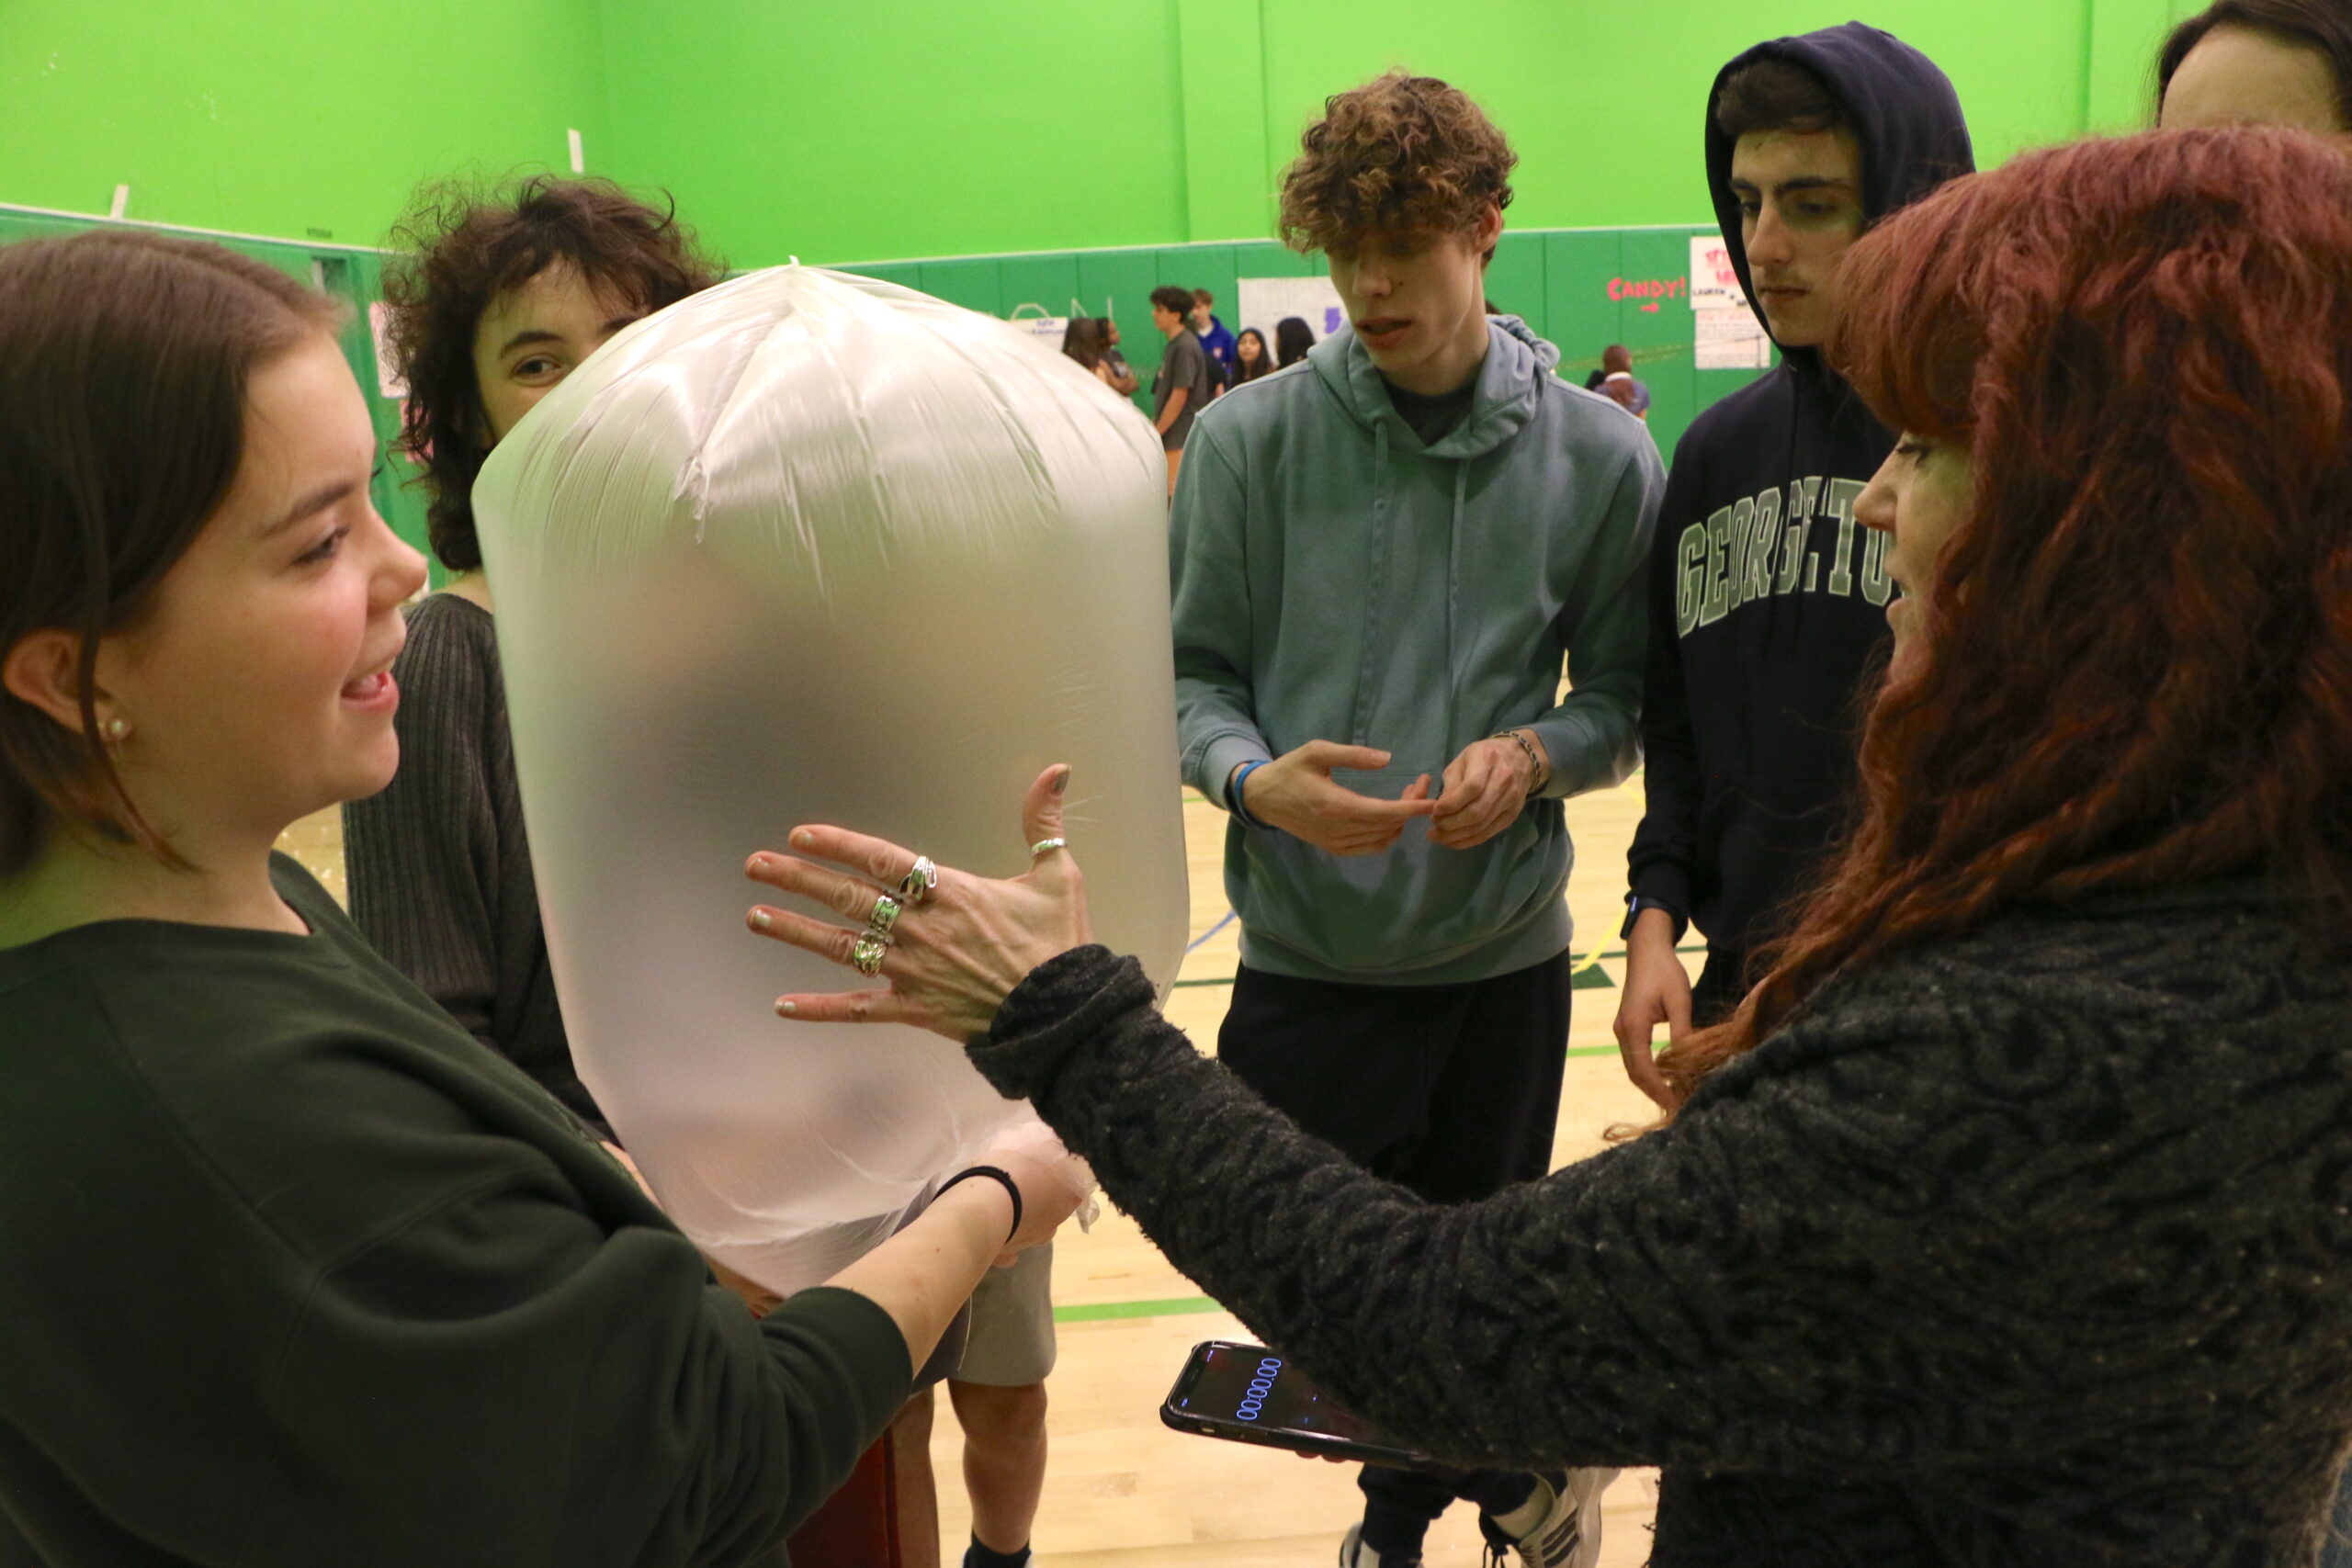 Students playing with an inflated plastic bag